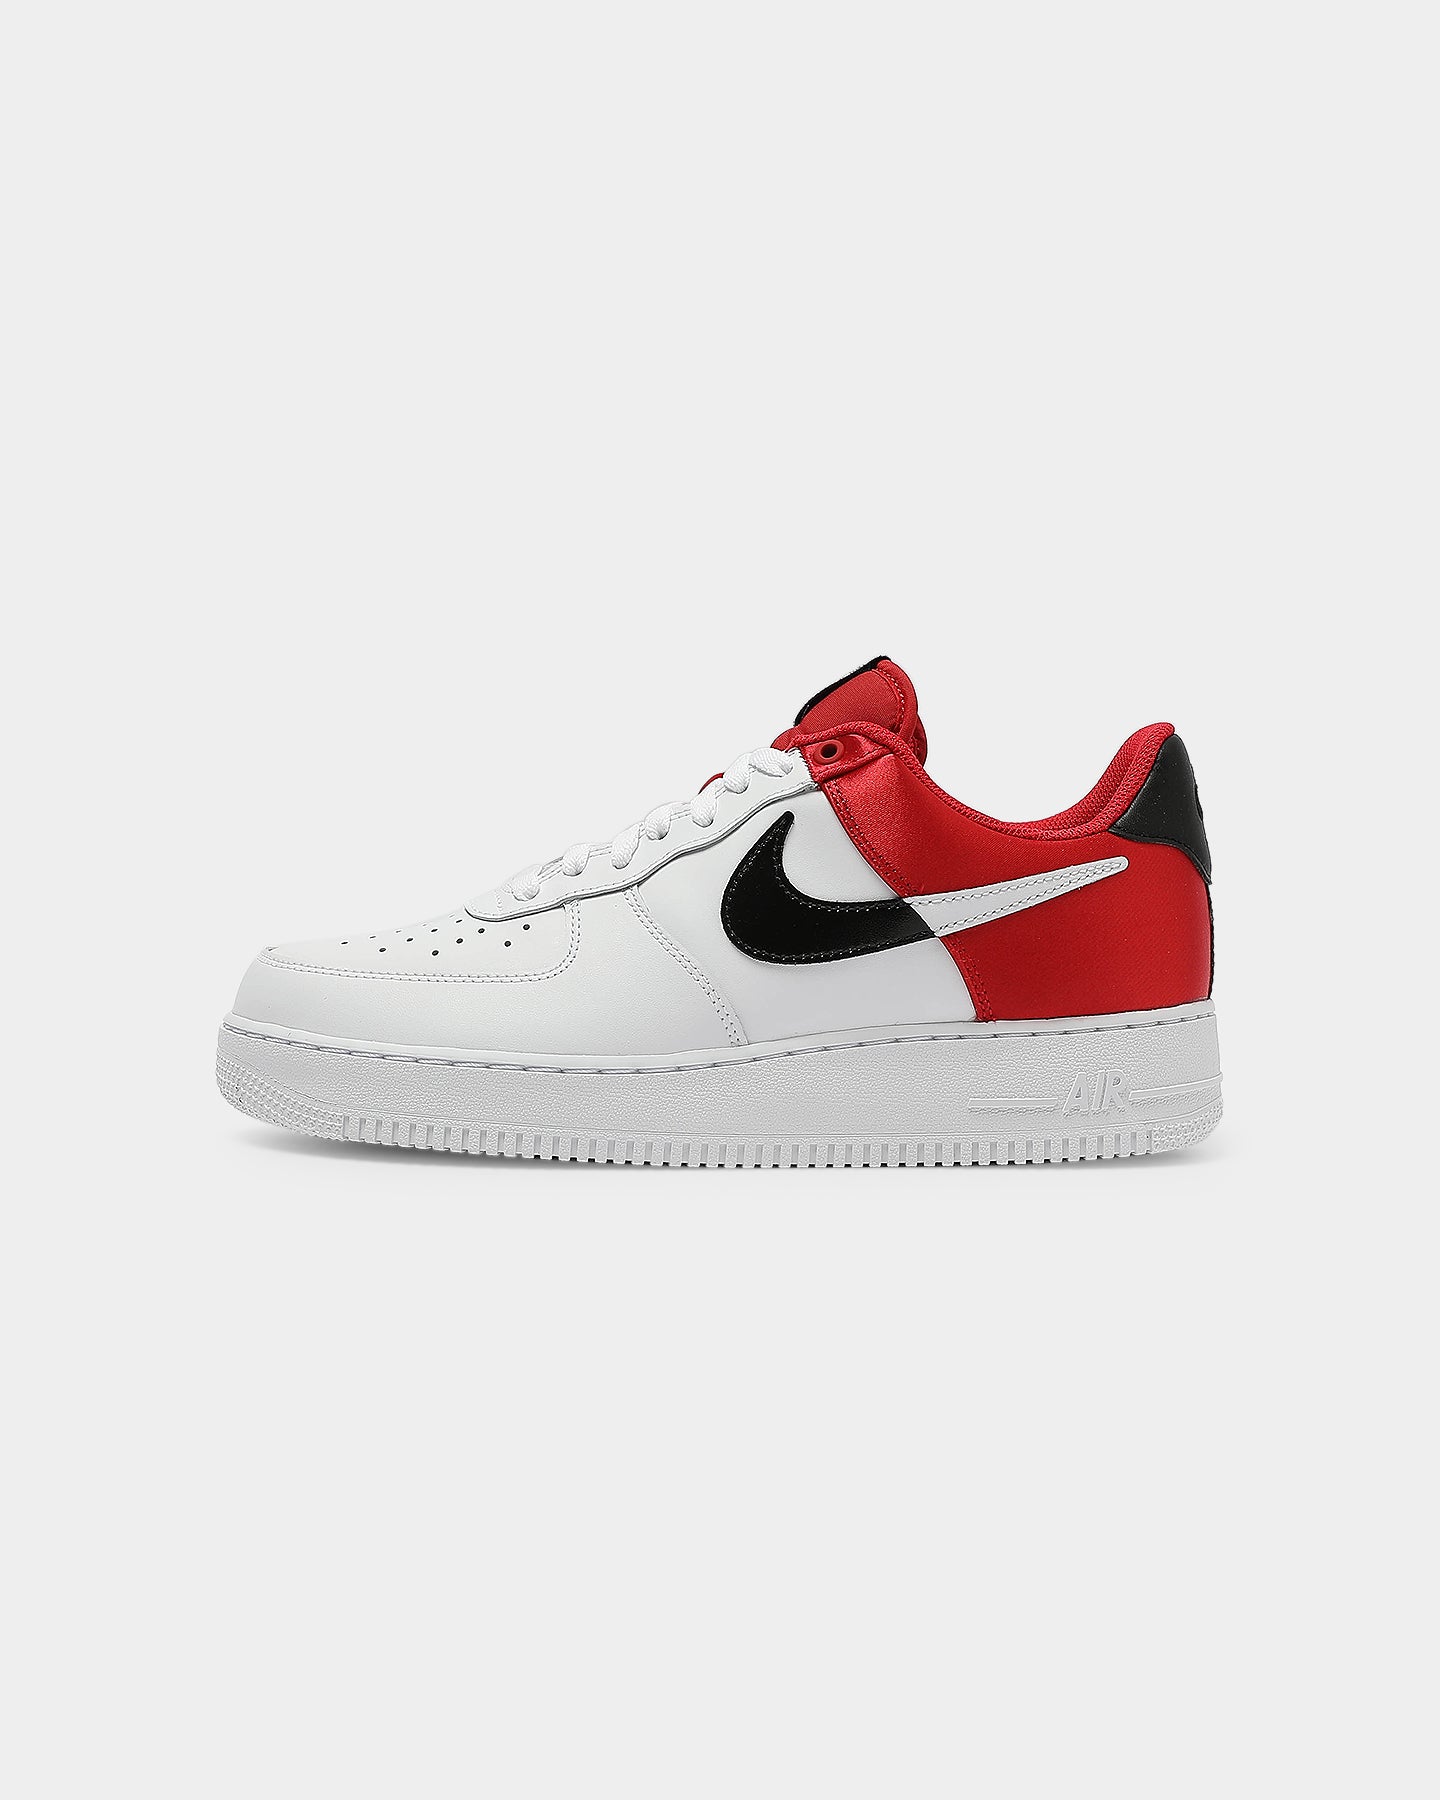 Nike Air Force 1 '07 LV8 1 Red/White 